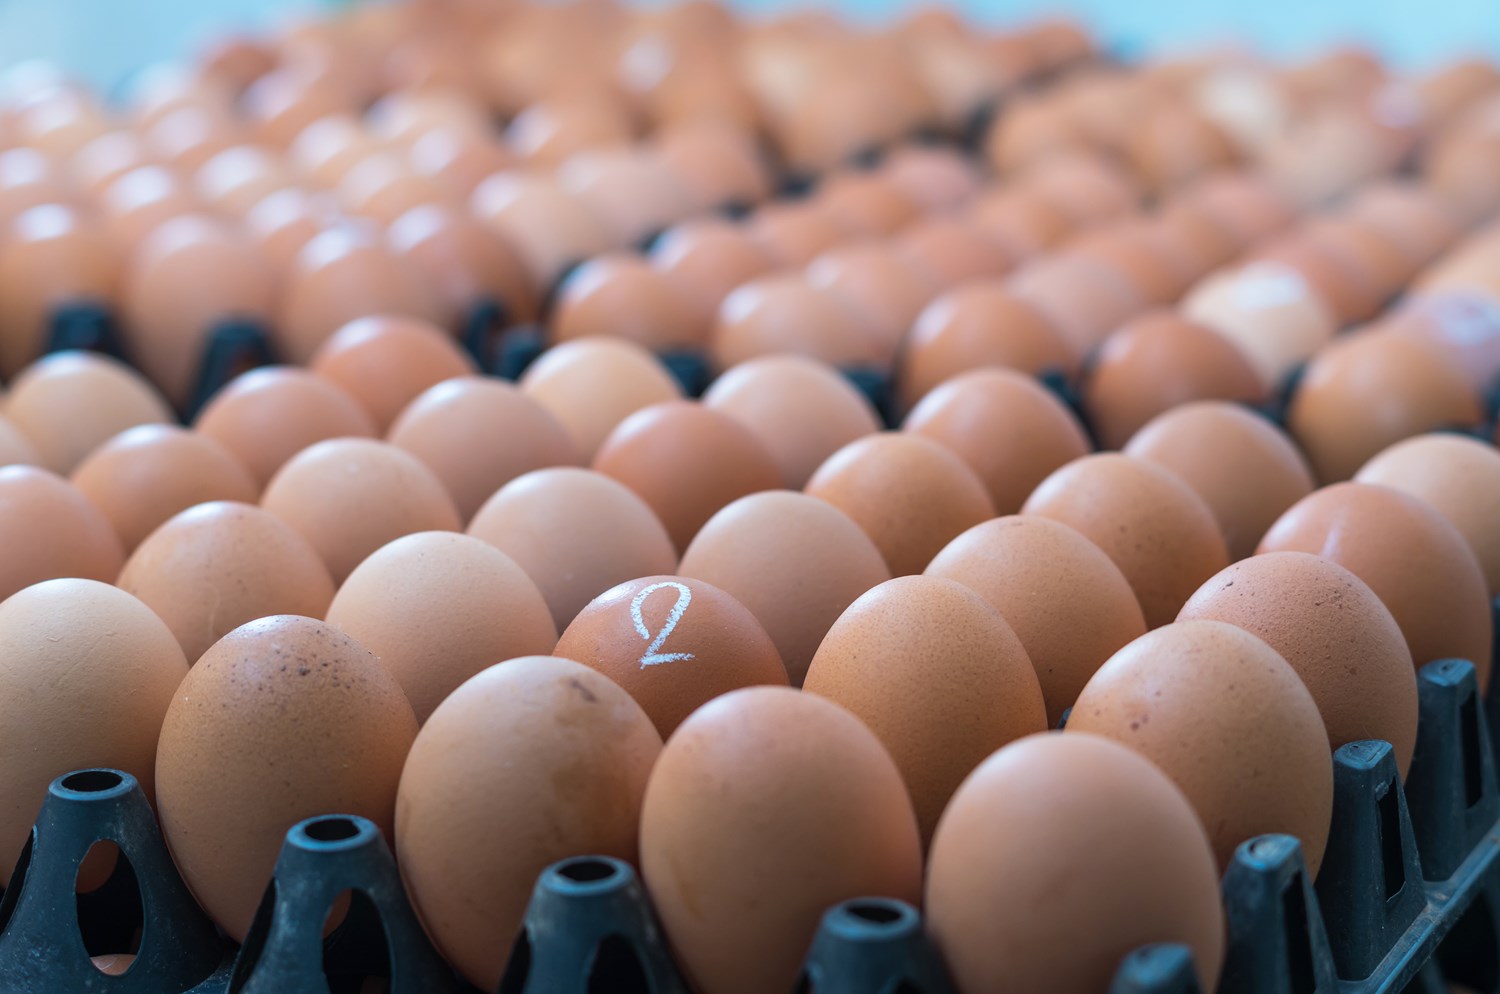 image of eggs in a tray